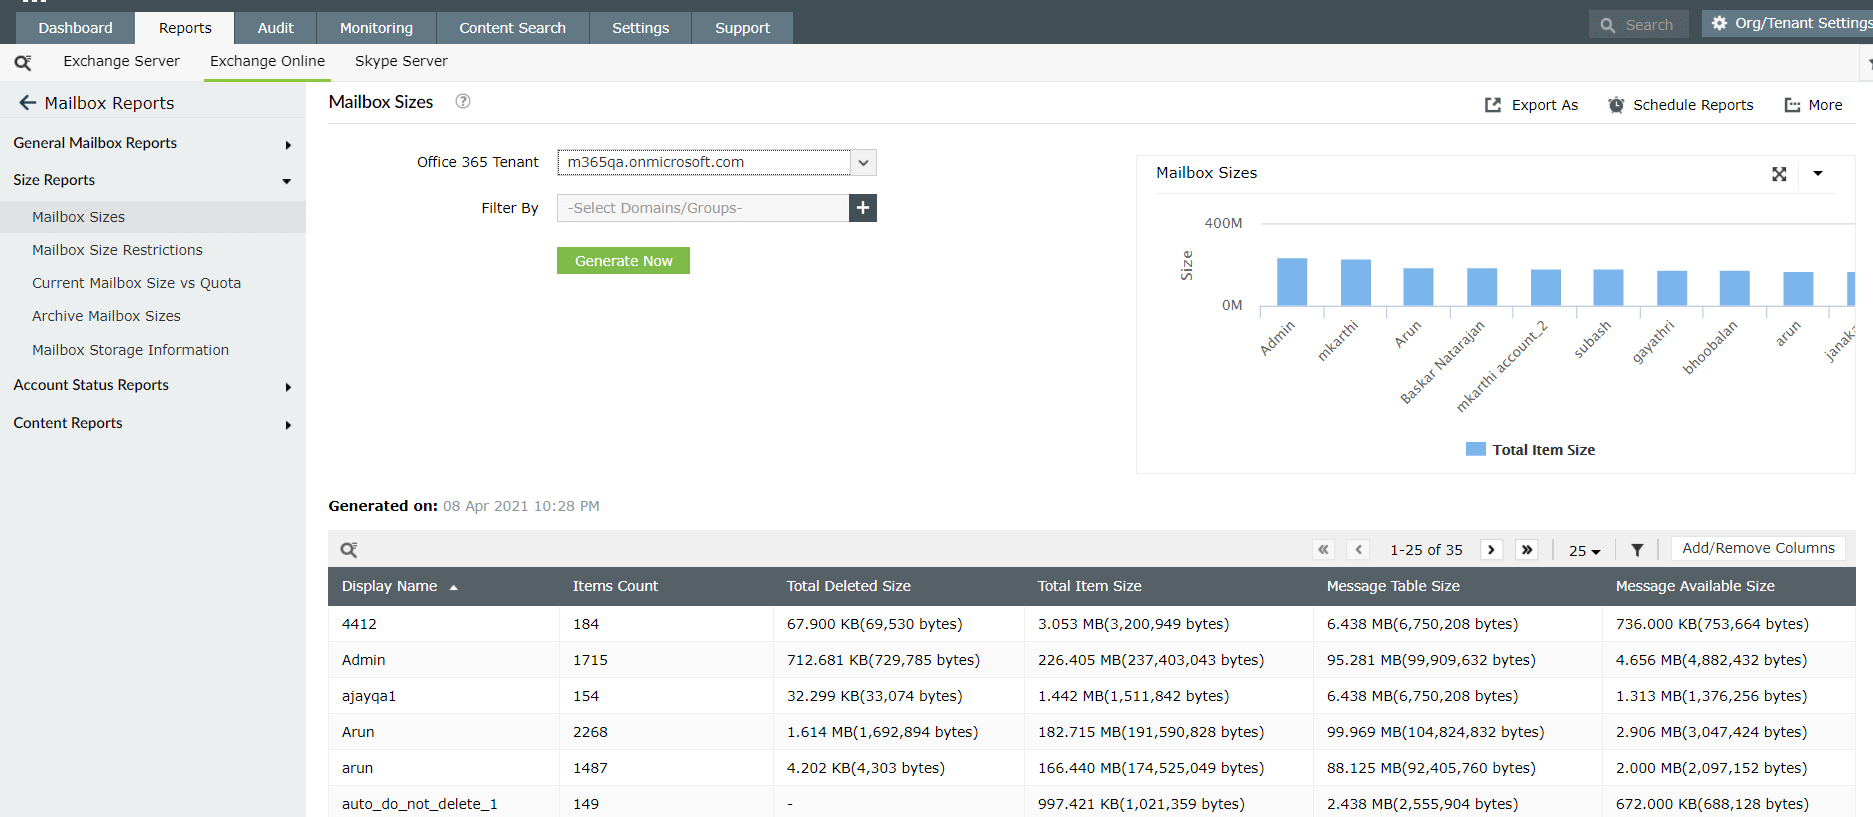 exchange-online-mailbox-size-reports